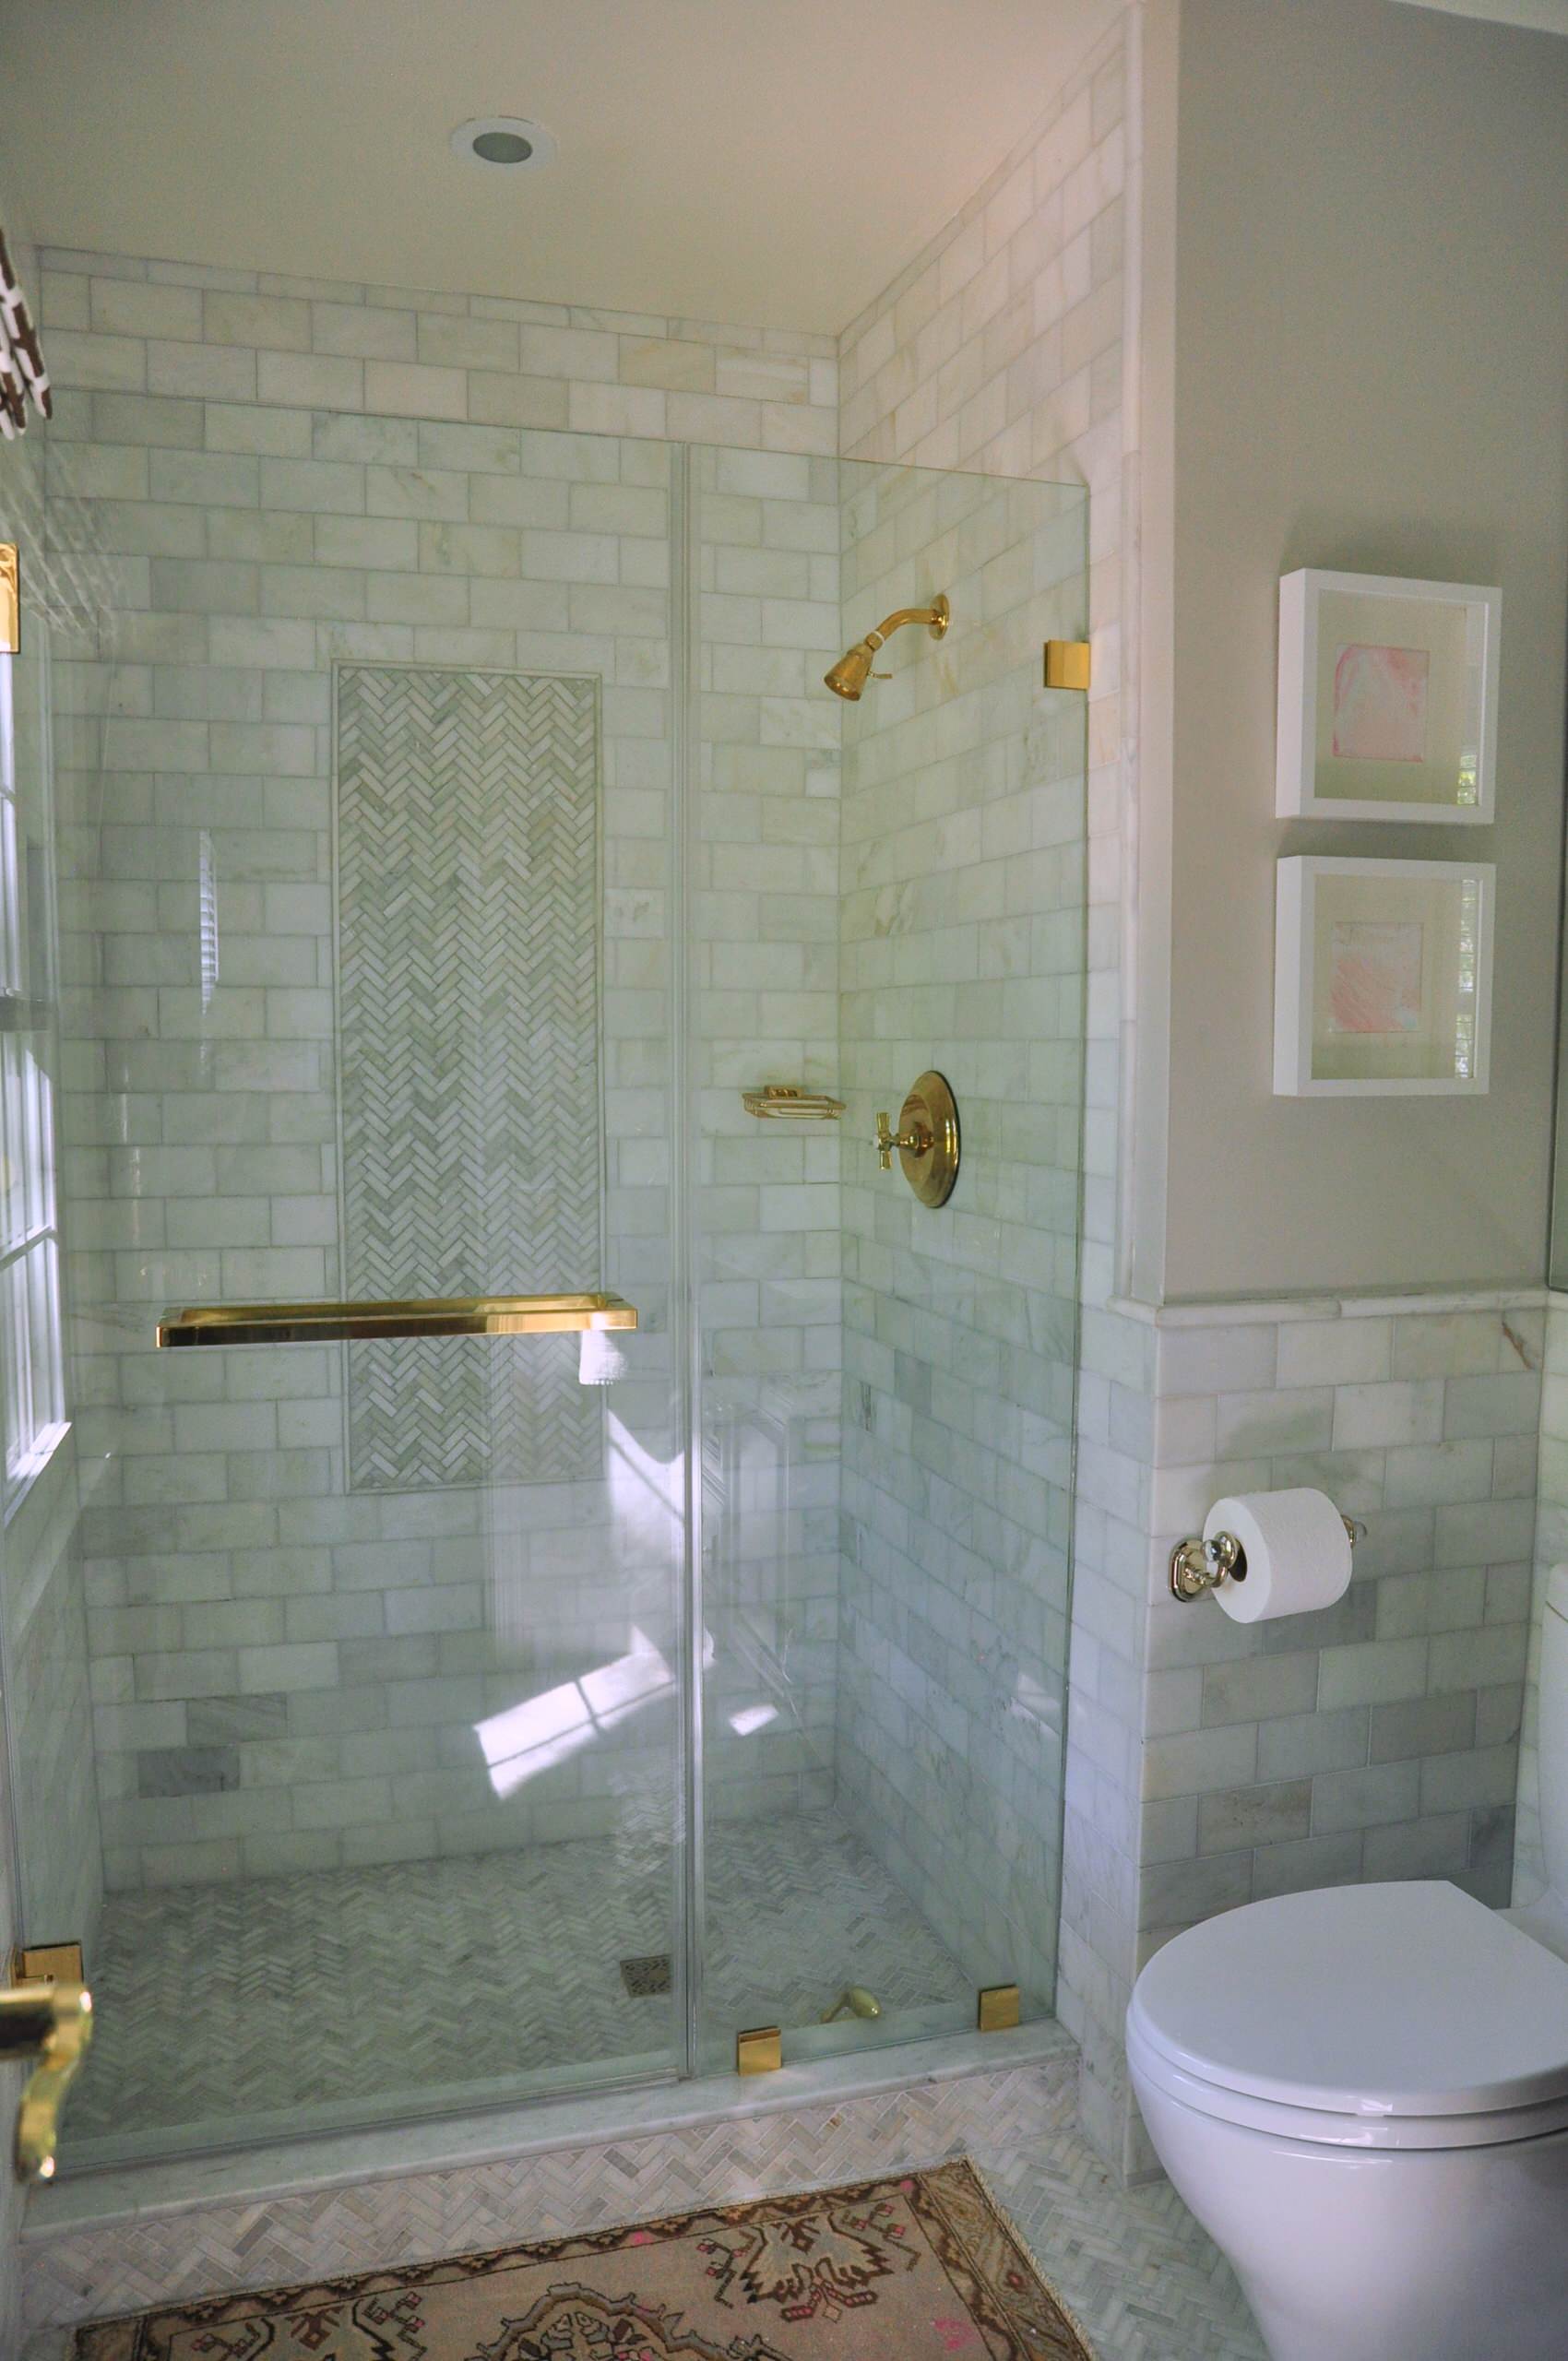 Carrera marble subway and herringbone tile in shower - Transitional -  Bathroom - Austin - by Alison Giese Interiors | Houzz